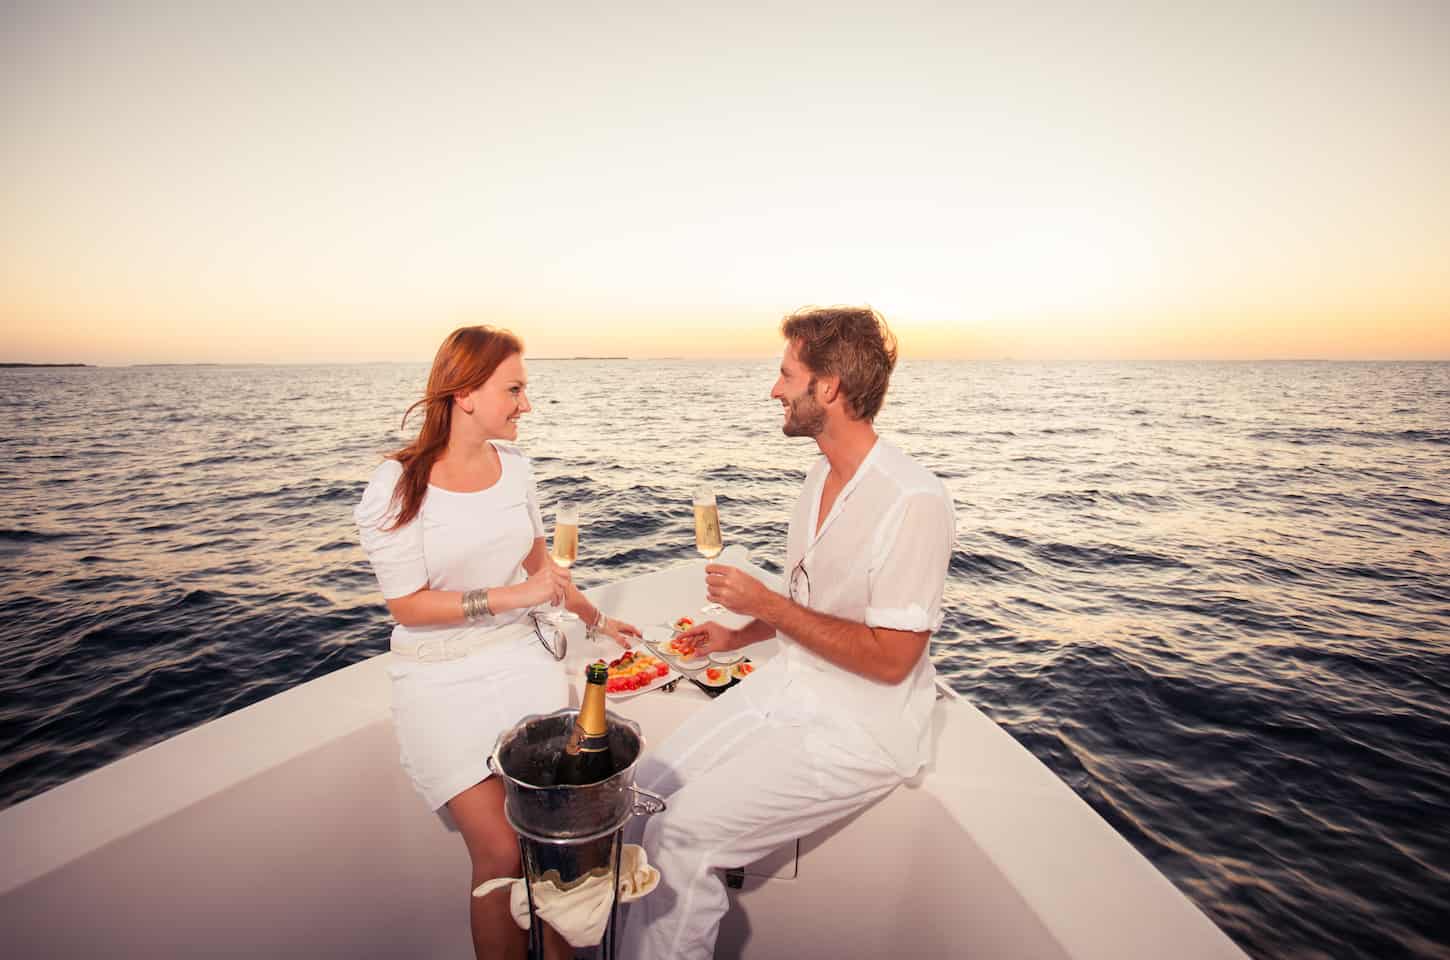 happy smiling couple sitting on bow of motor boat celebrating with champagne and fingerfood on sea at sunset